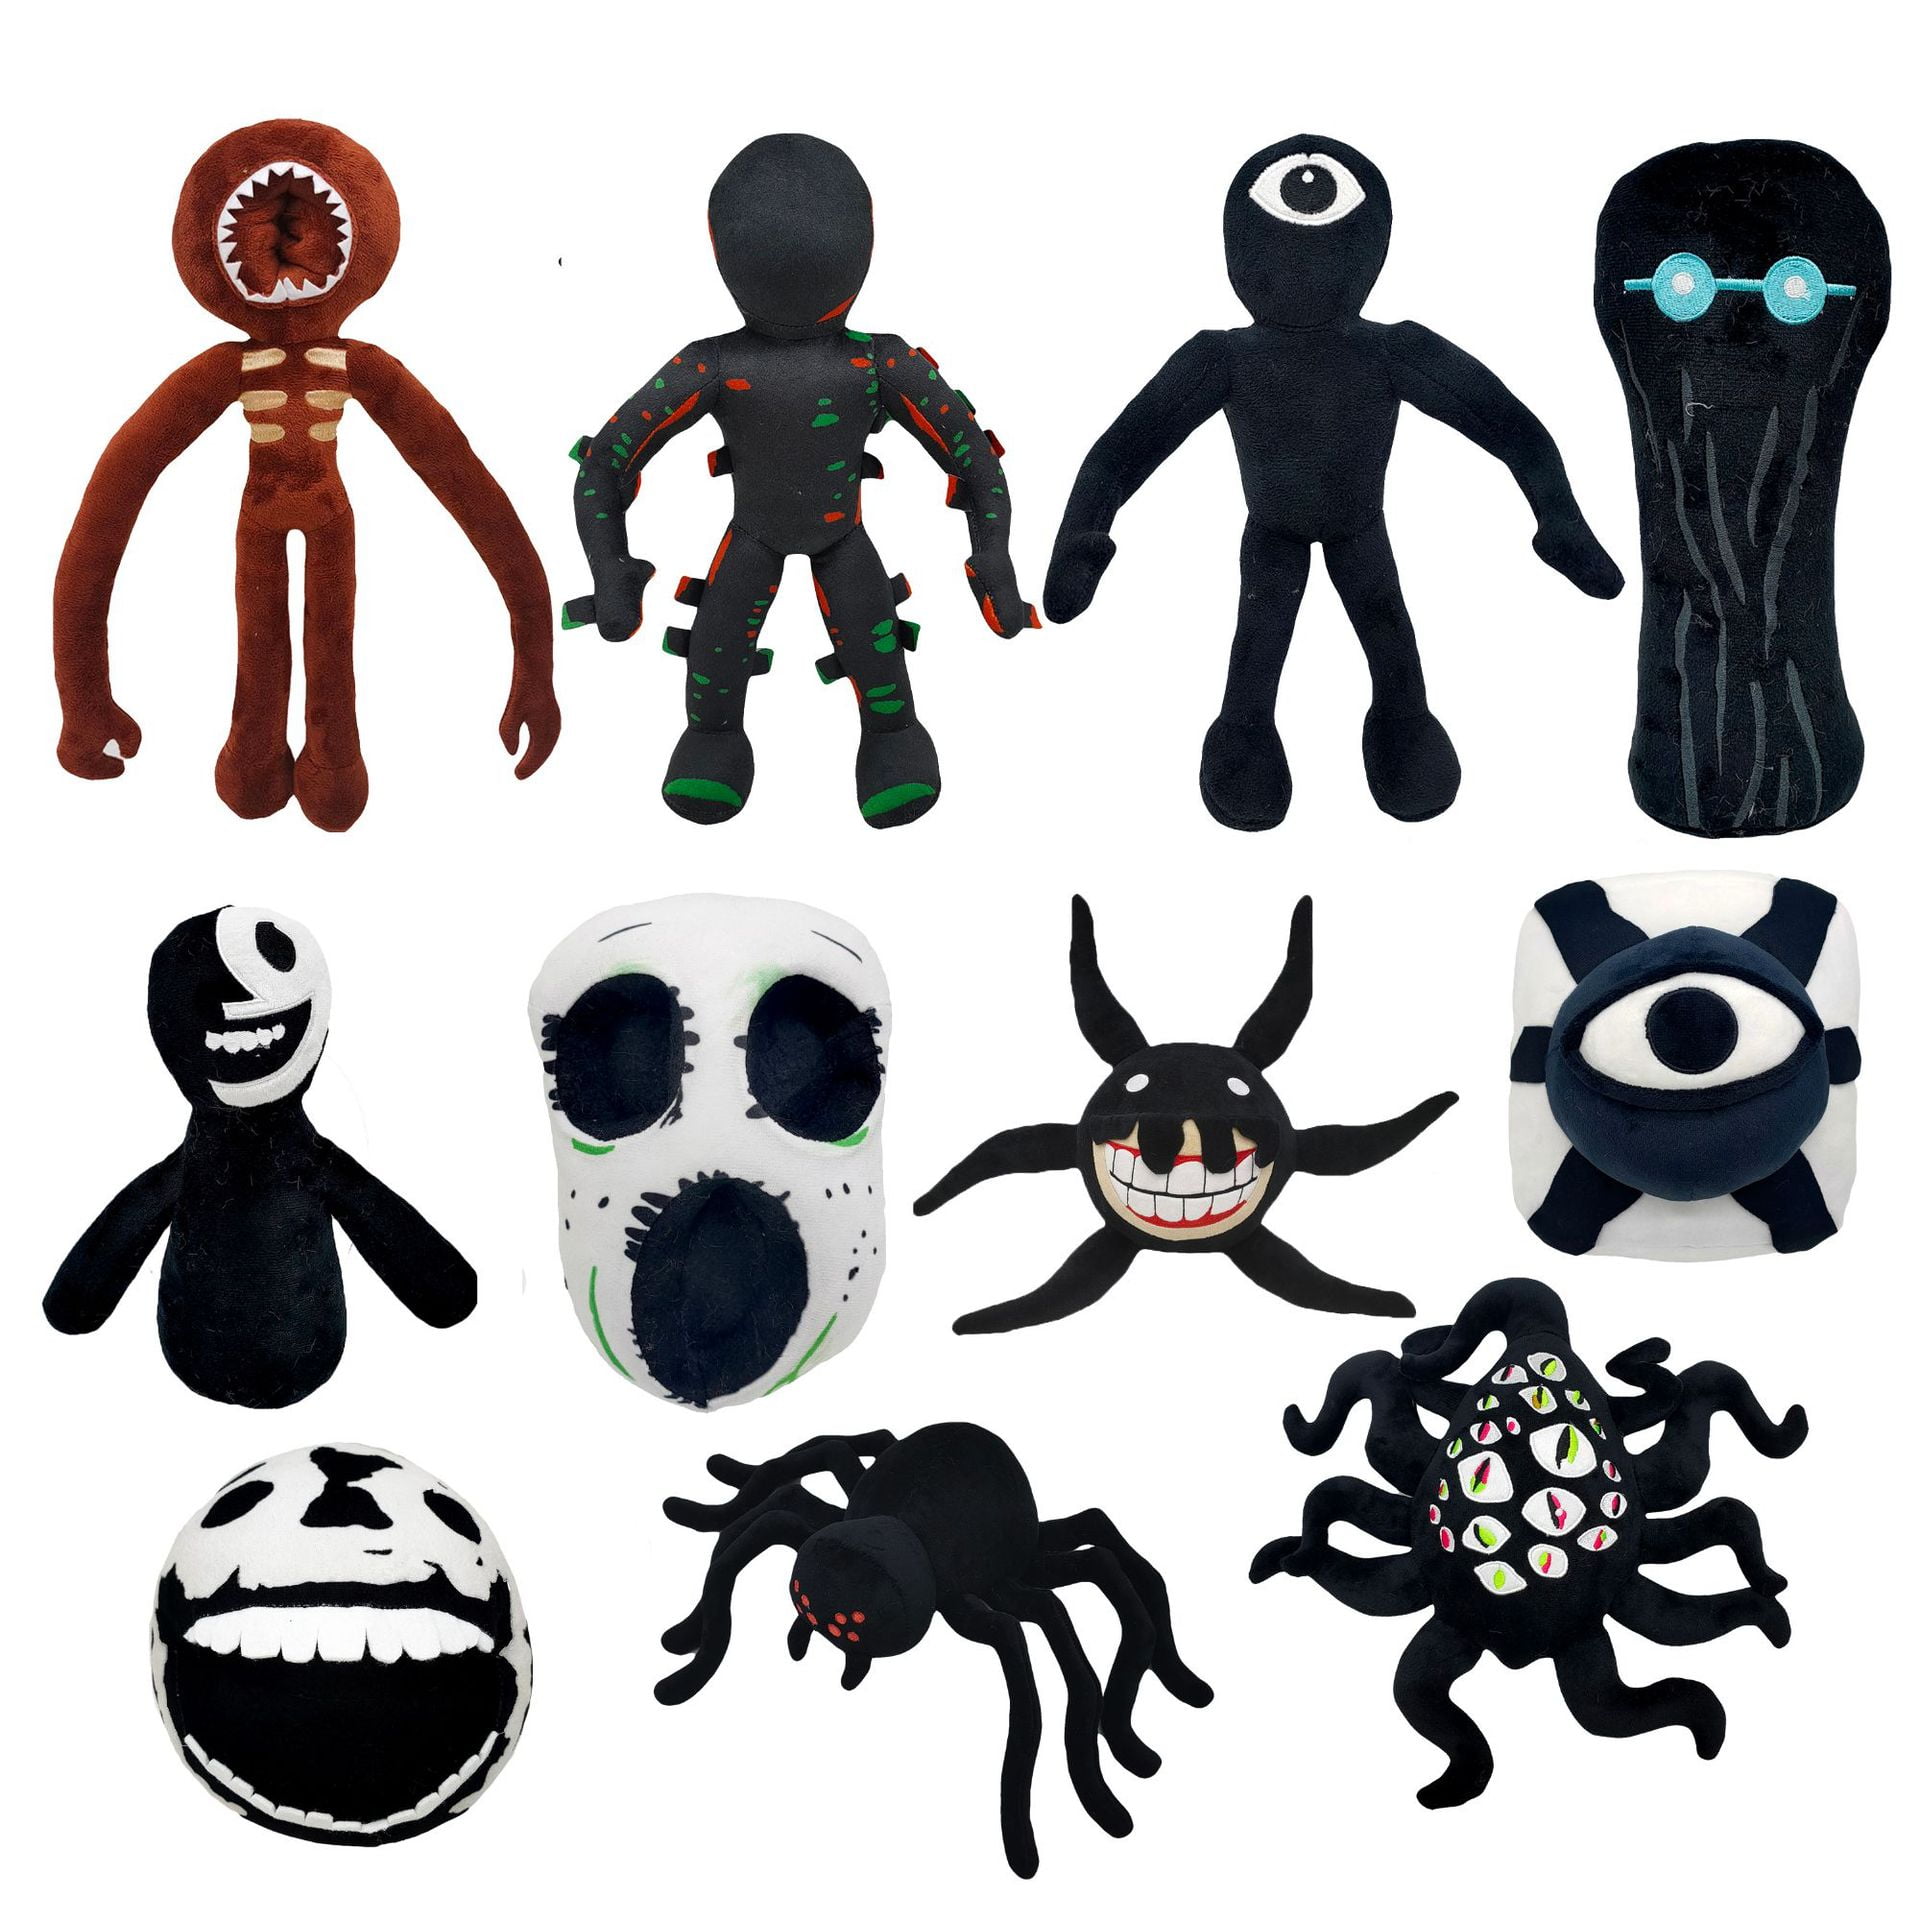  Doors Plush - 13 Figure Plushies Toy for Fans Gift, 2022 New  Monster Horror Game Stuffed Figure Doll for Kids and Adults, Halloween  Christmas Birthday Choice for Boys Girls : Toys